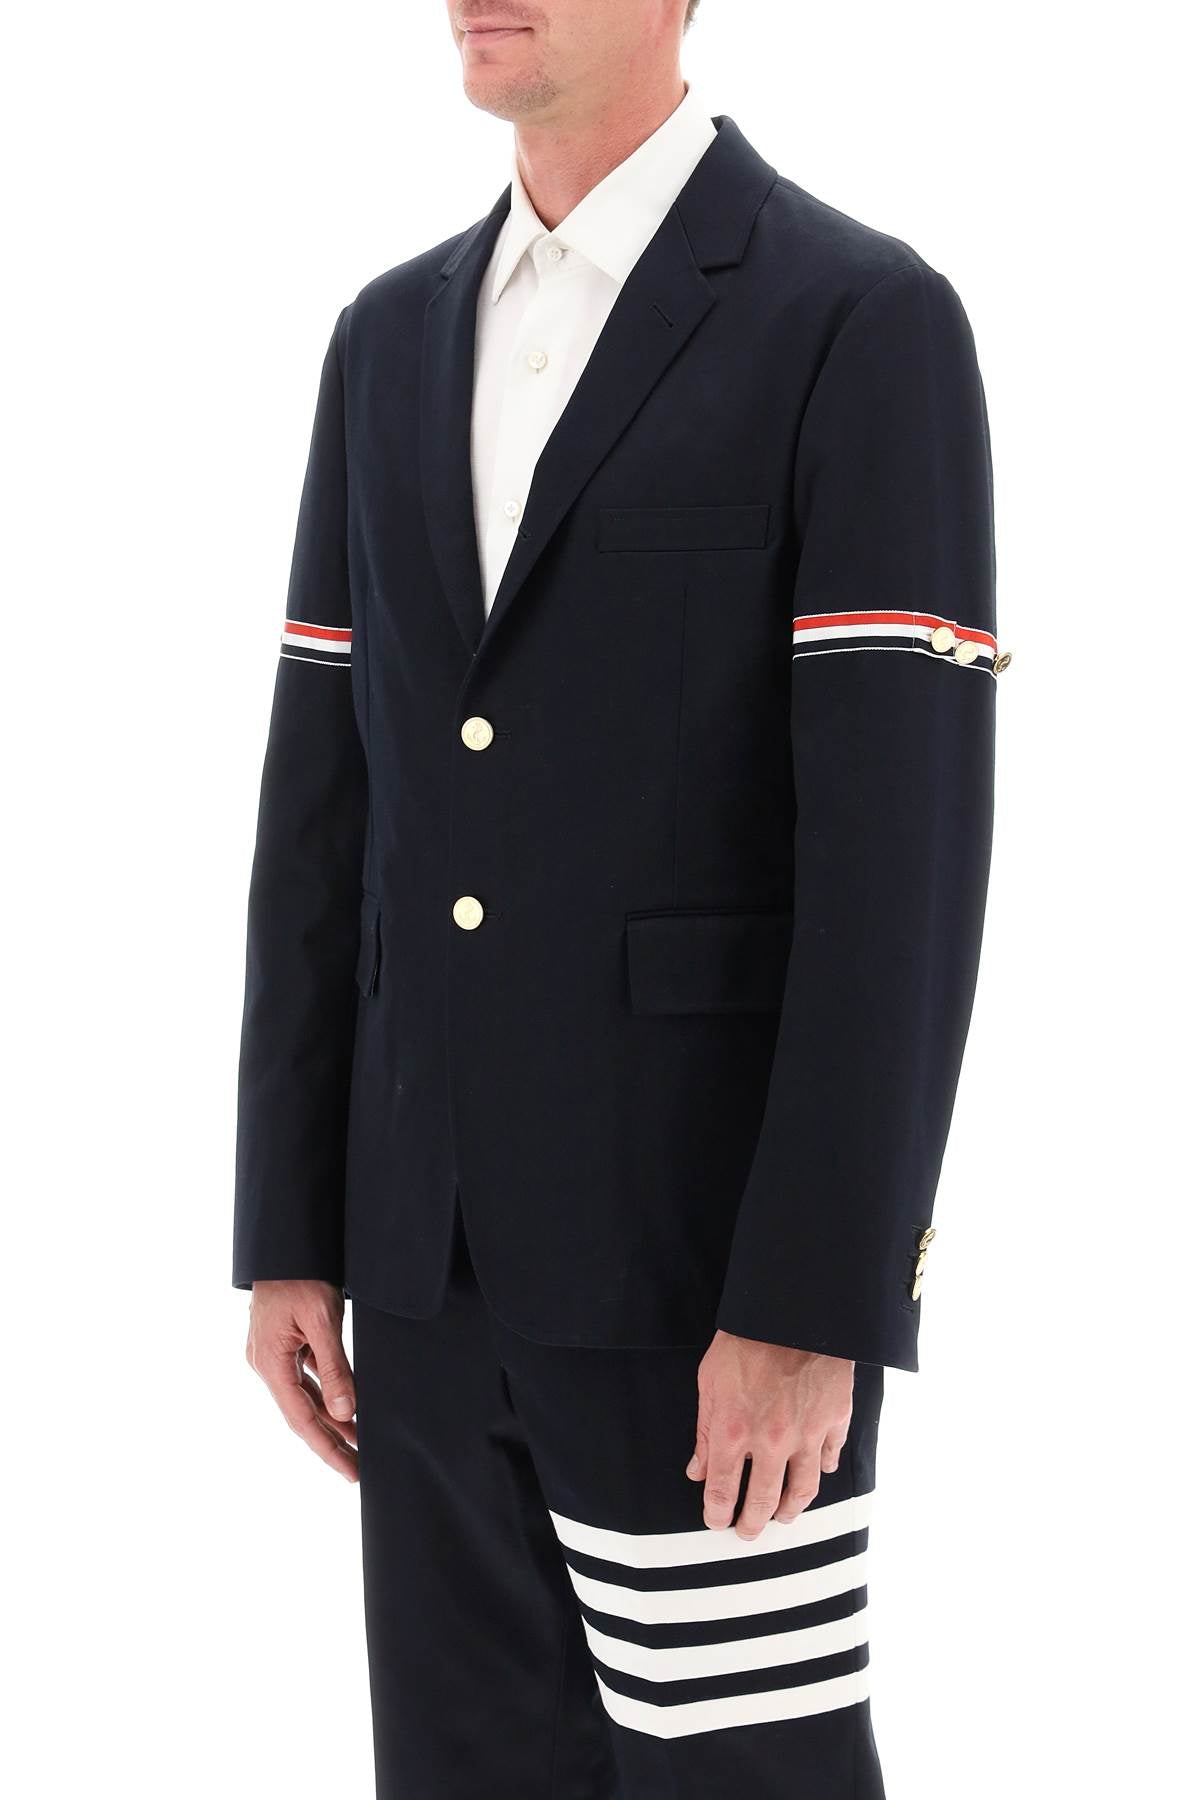 Thom browne deconstructed jacket with tricolor bands-3